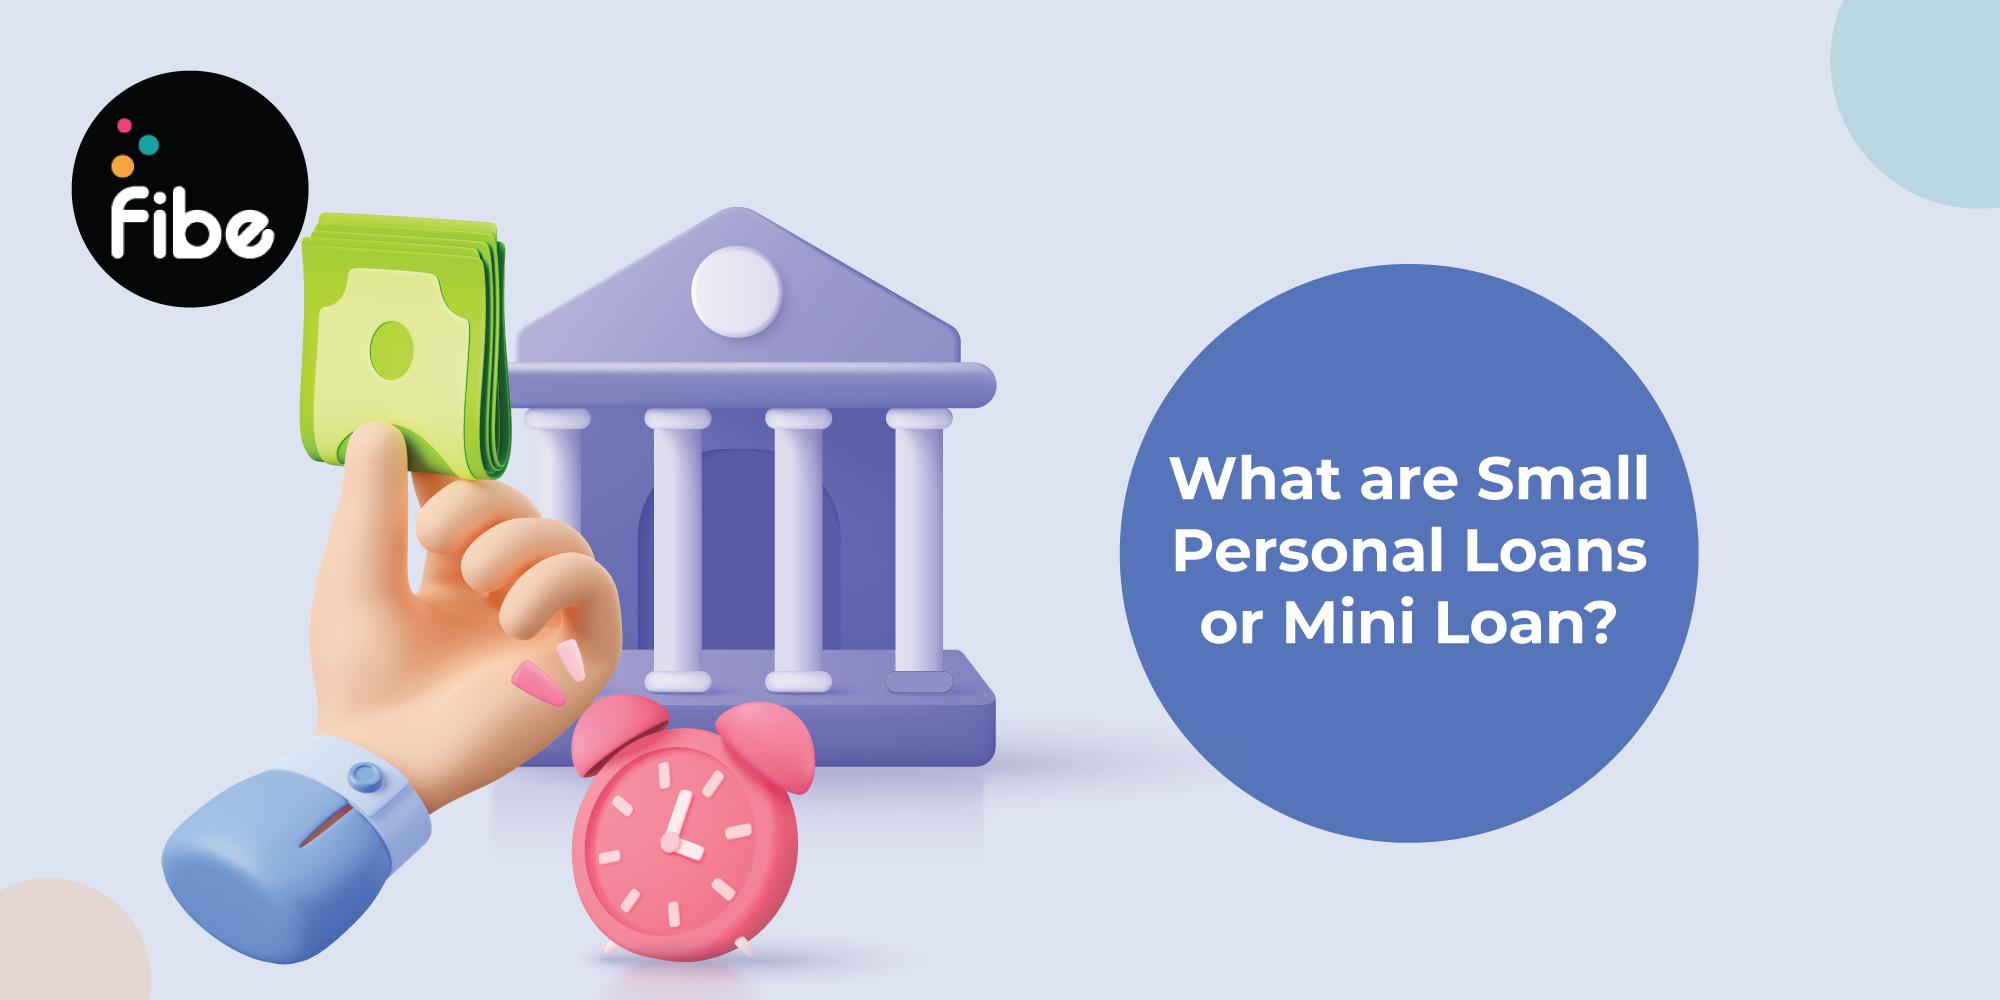 Need a Small Personal Loan? All you need to know about mini loans